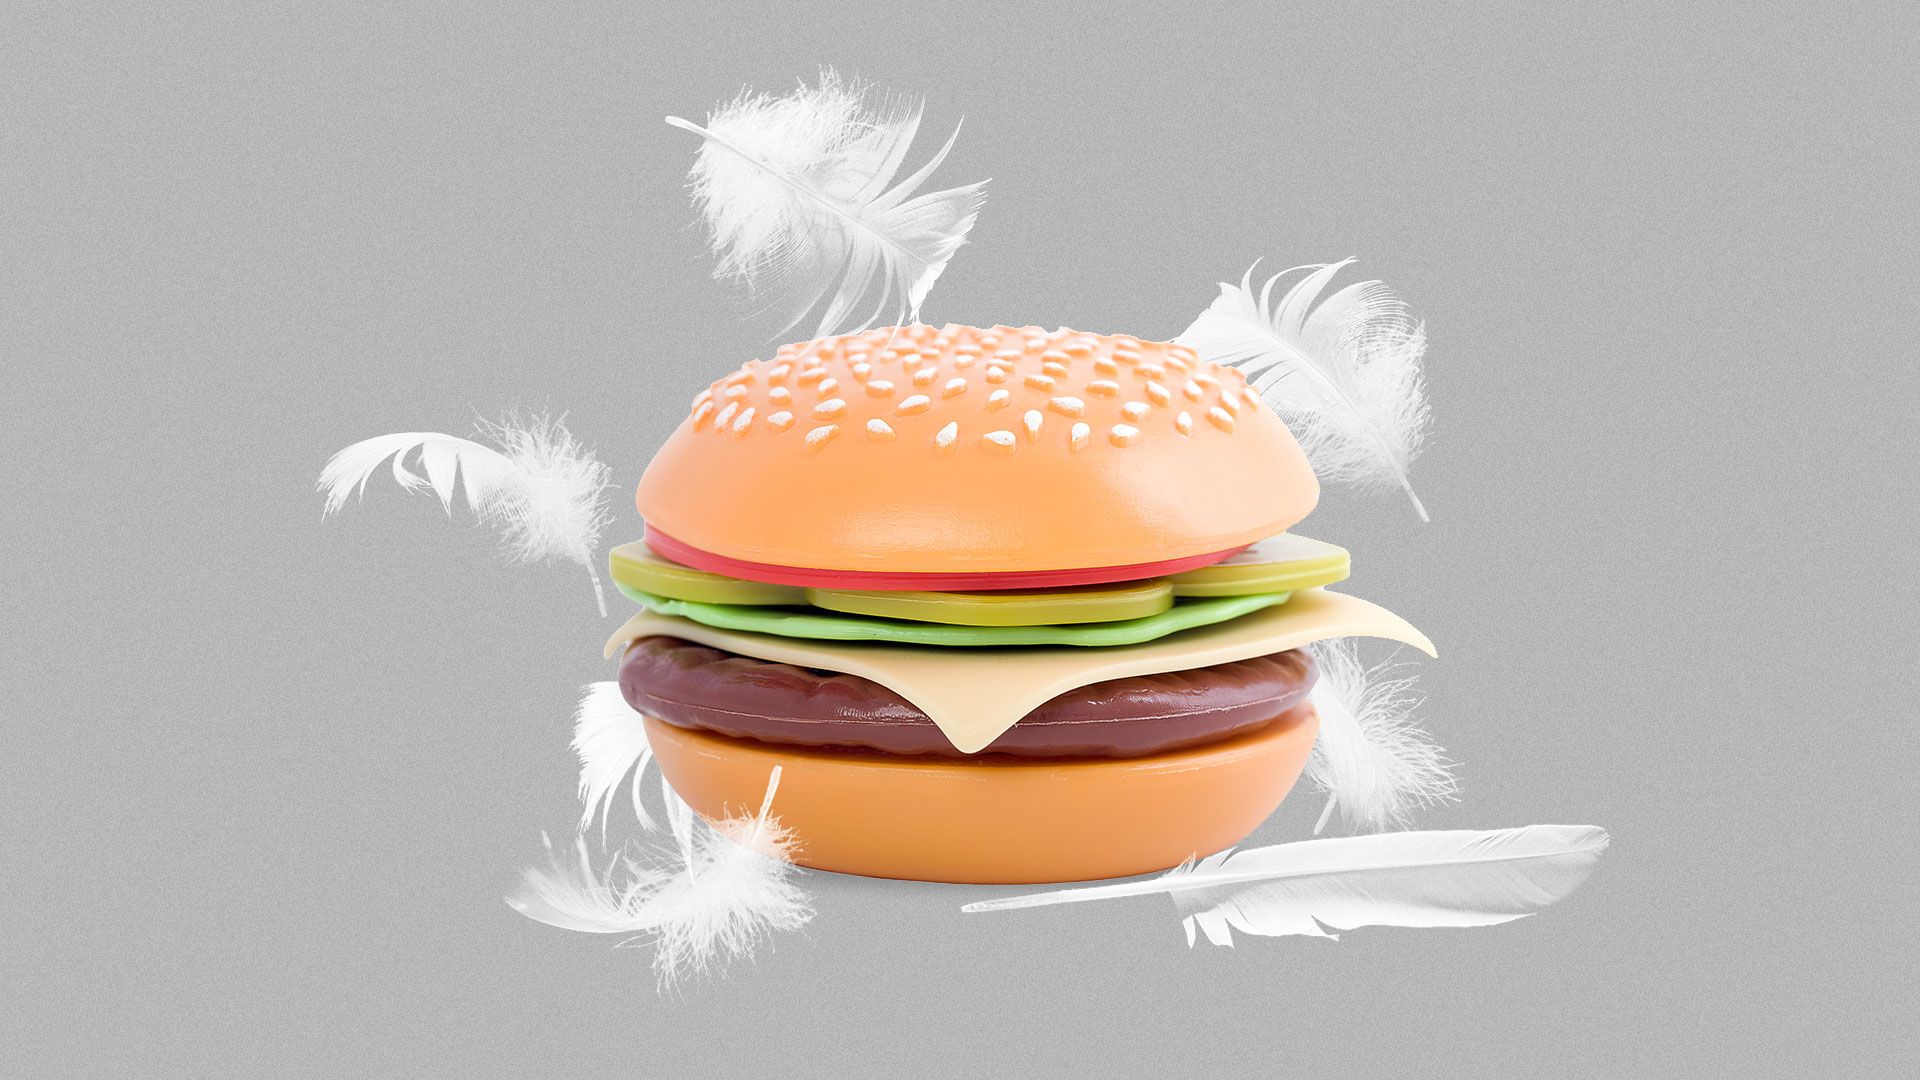 Illustration of a plastic hamburger surrounded by chicken feathers.